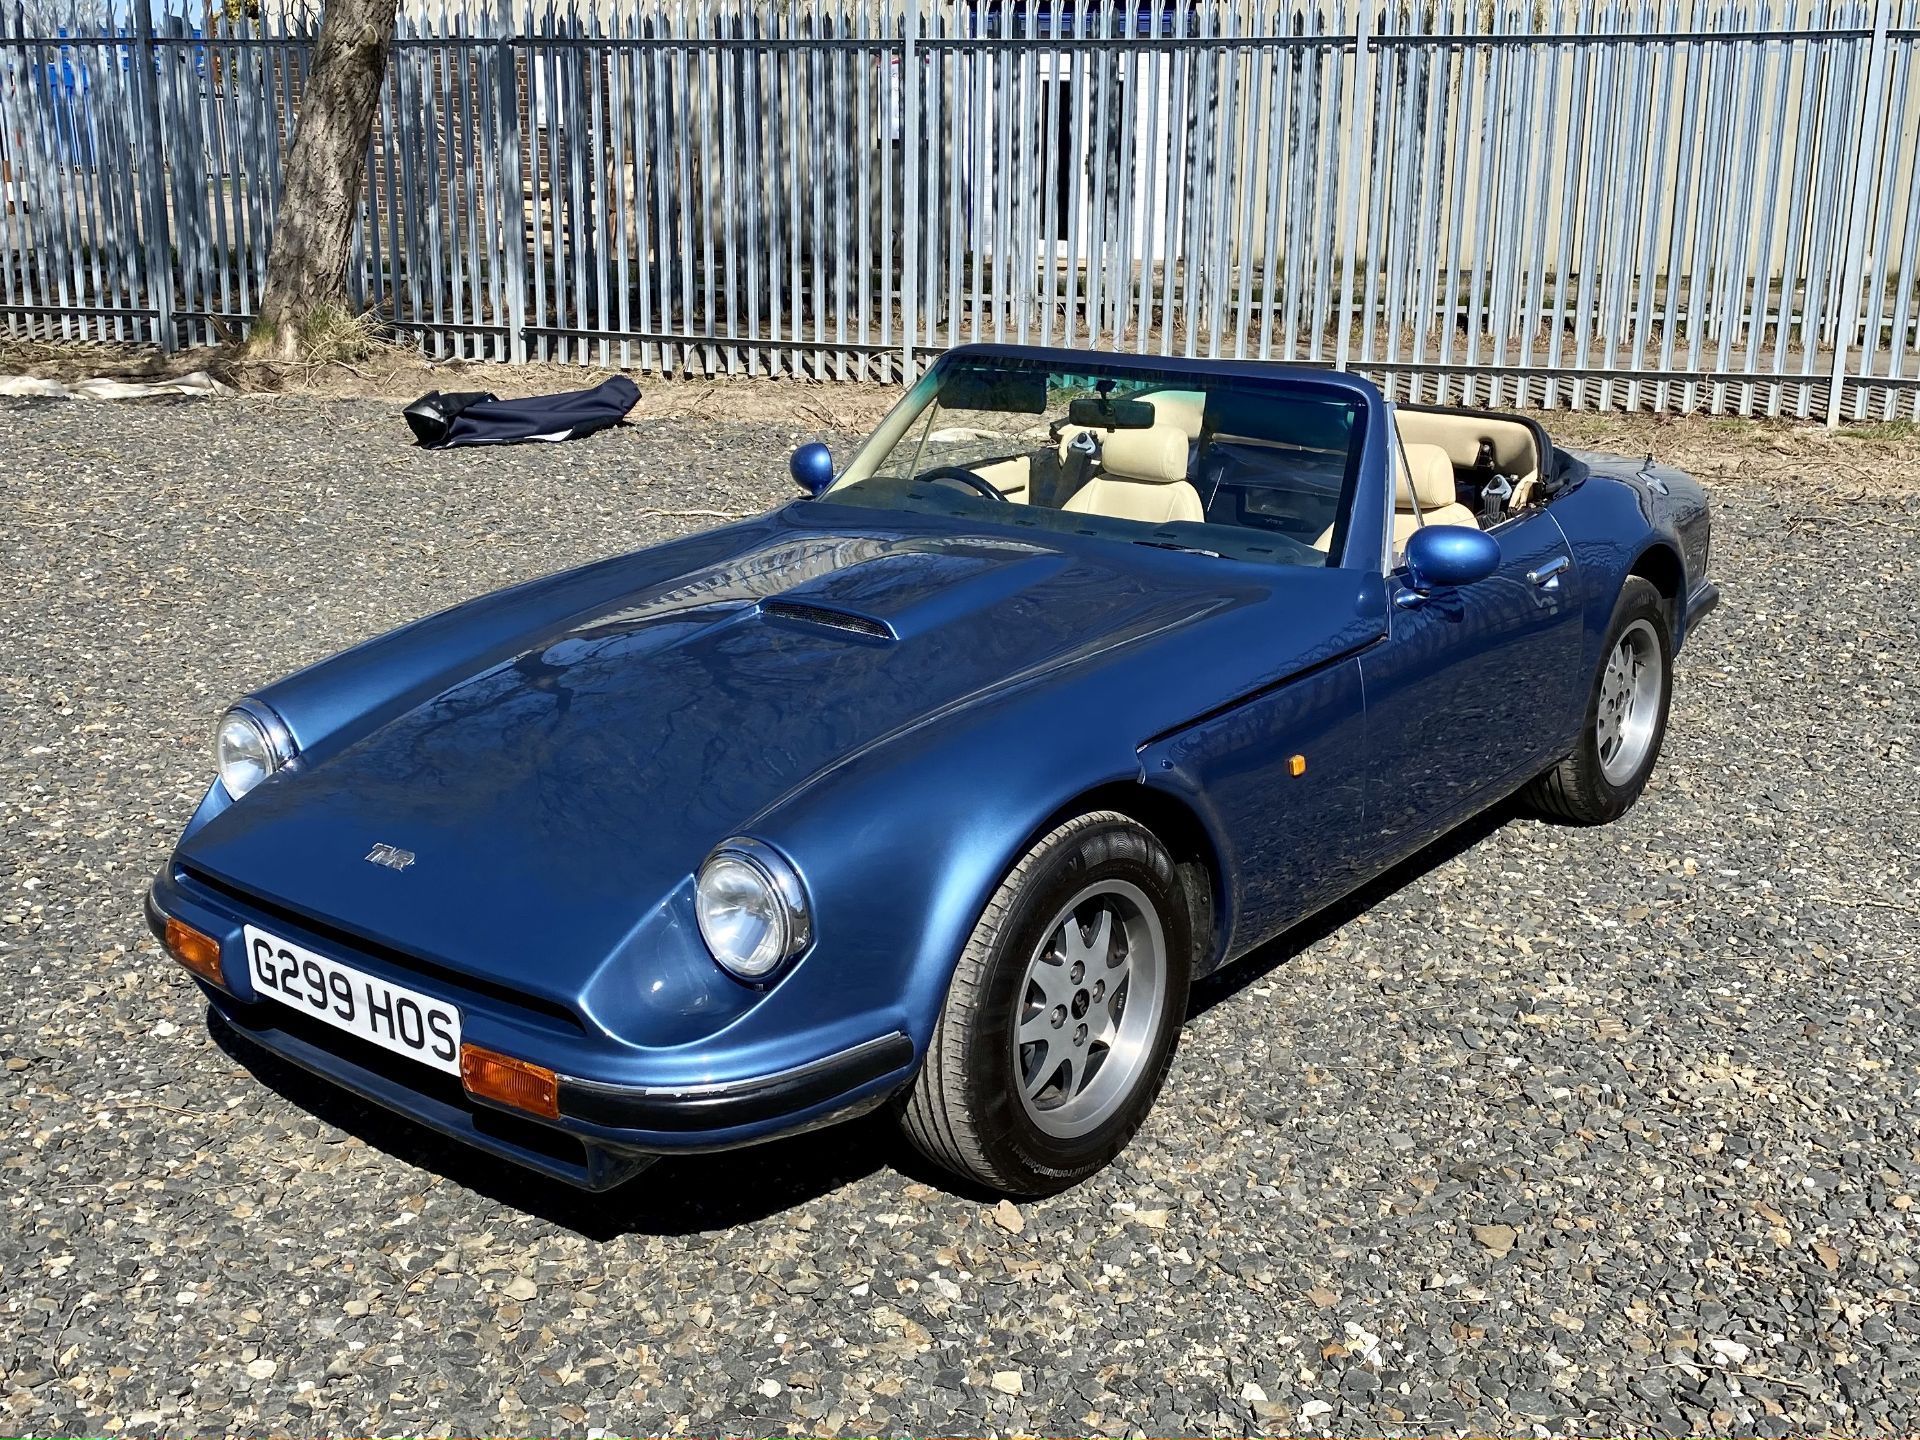 TVR S2 - Image 13 of 60